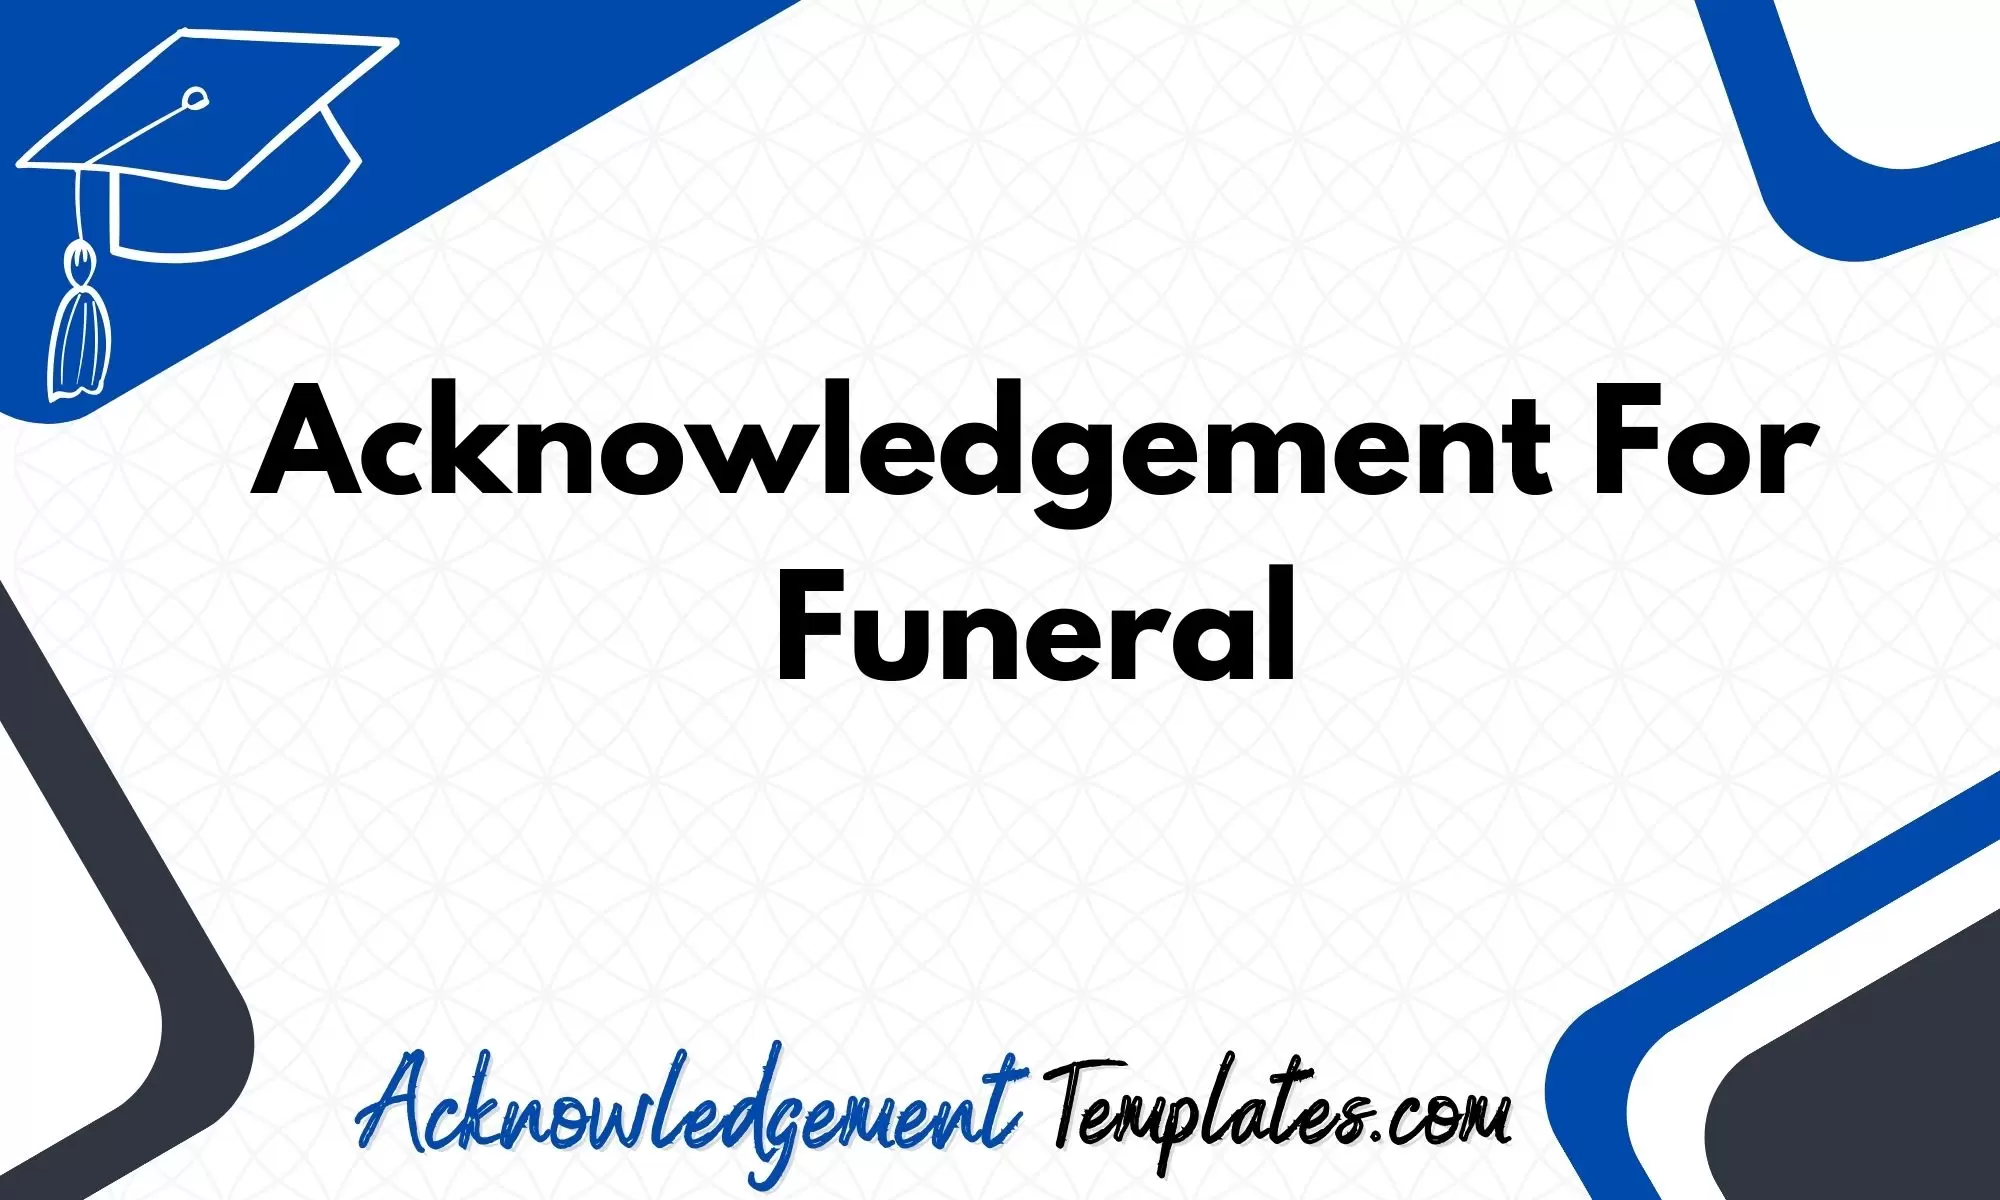 Acknowledgement For Funeral